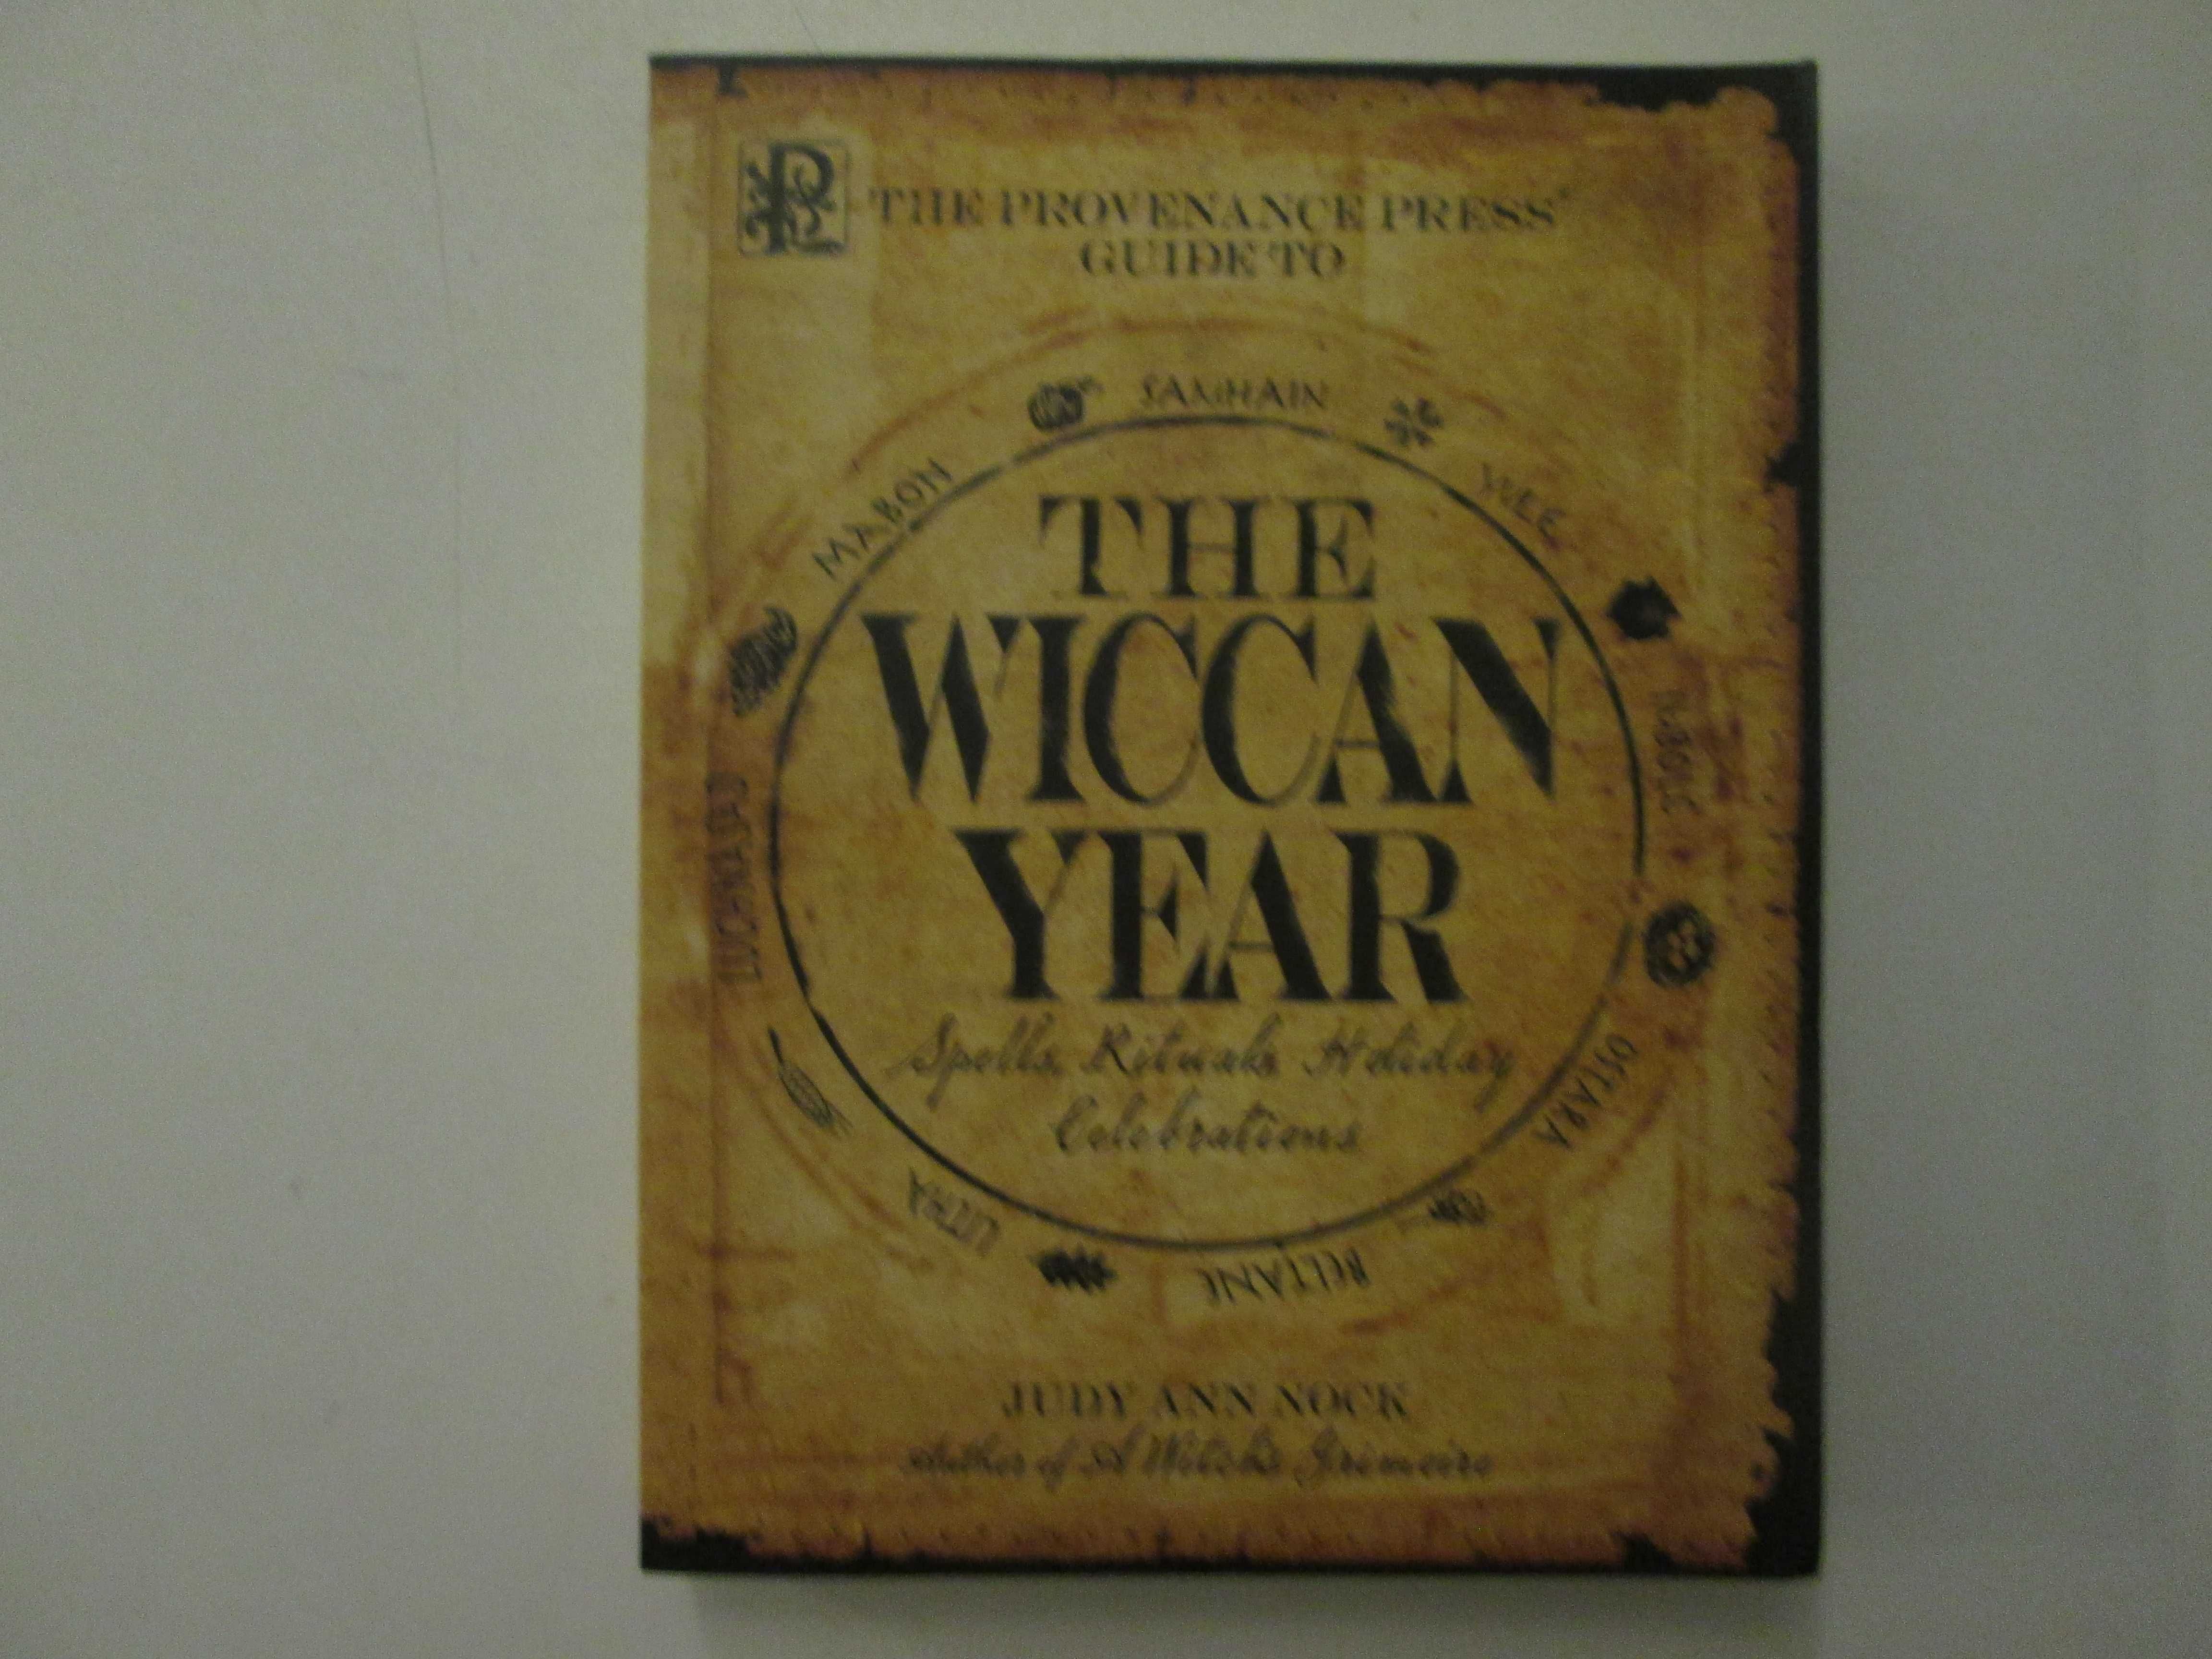 The Wiccan year- Judy Ann Nock